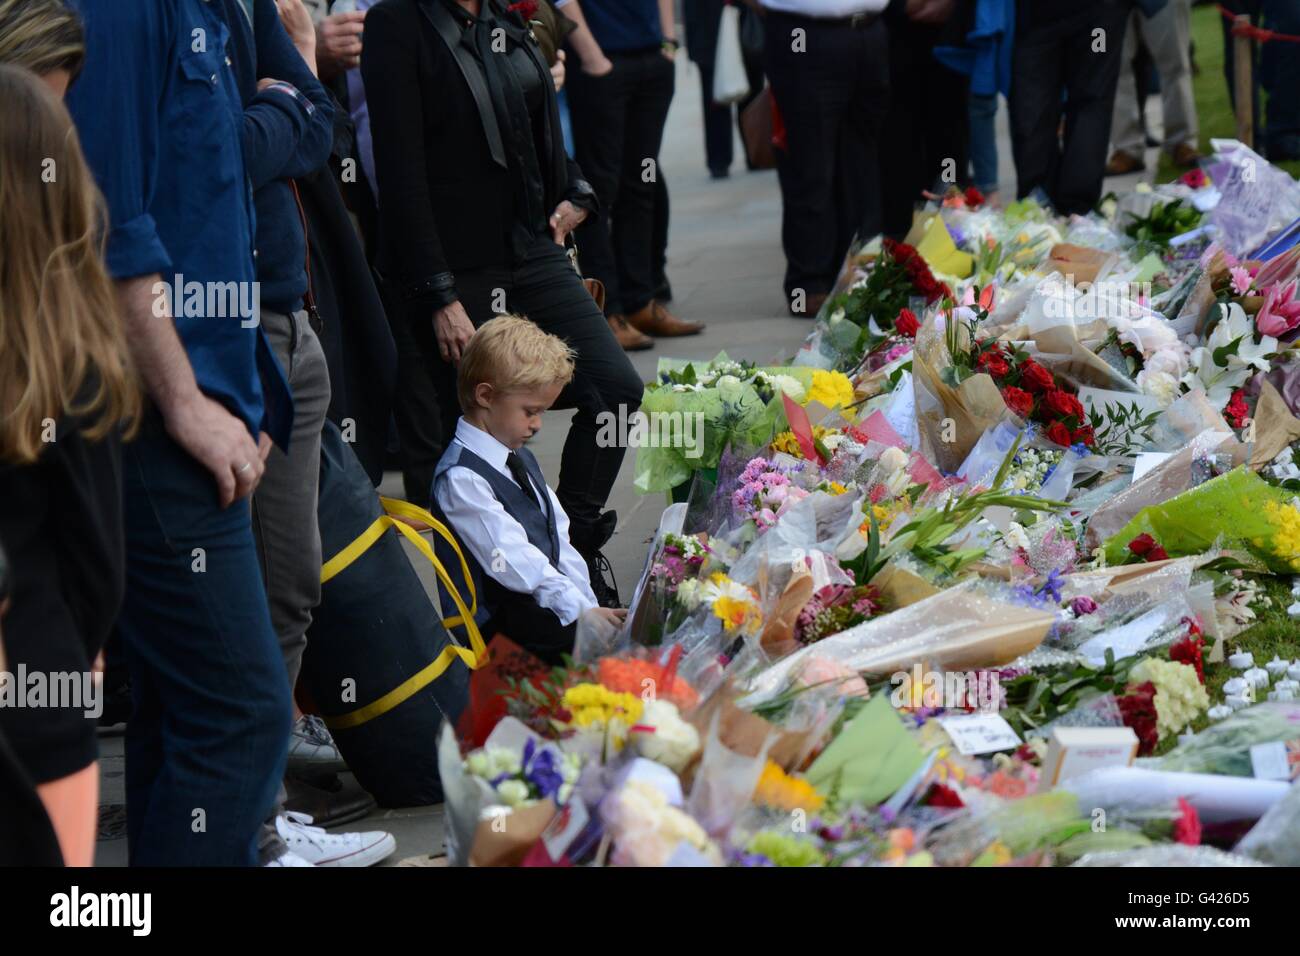 London, England. 17 June 2016. A small child looks at the tributes for Jo Cox MP. Credit: Marc Ward/Alamy Live News Stock Photo